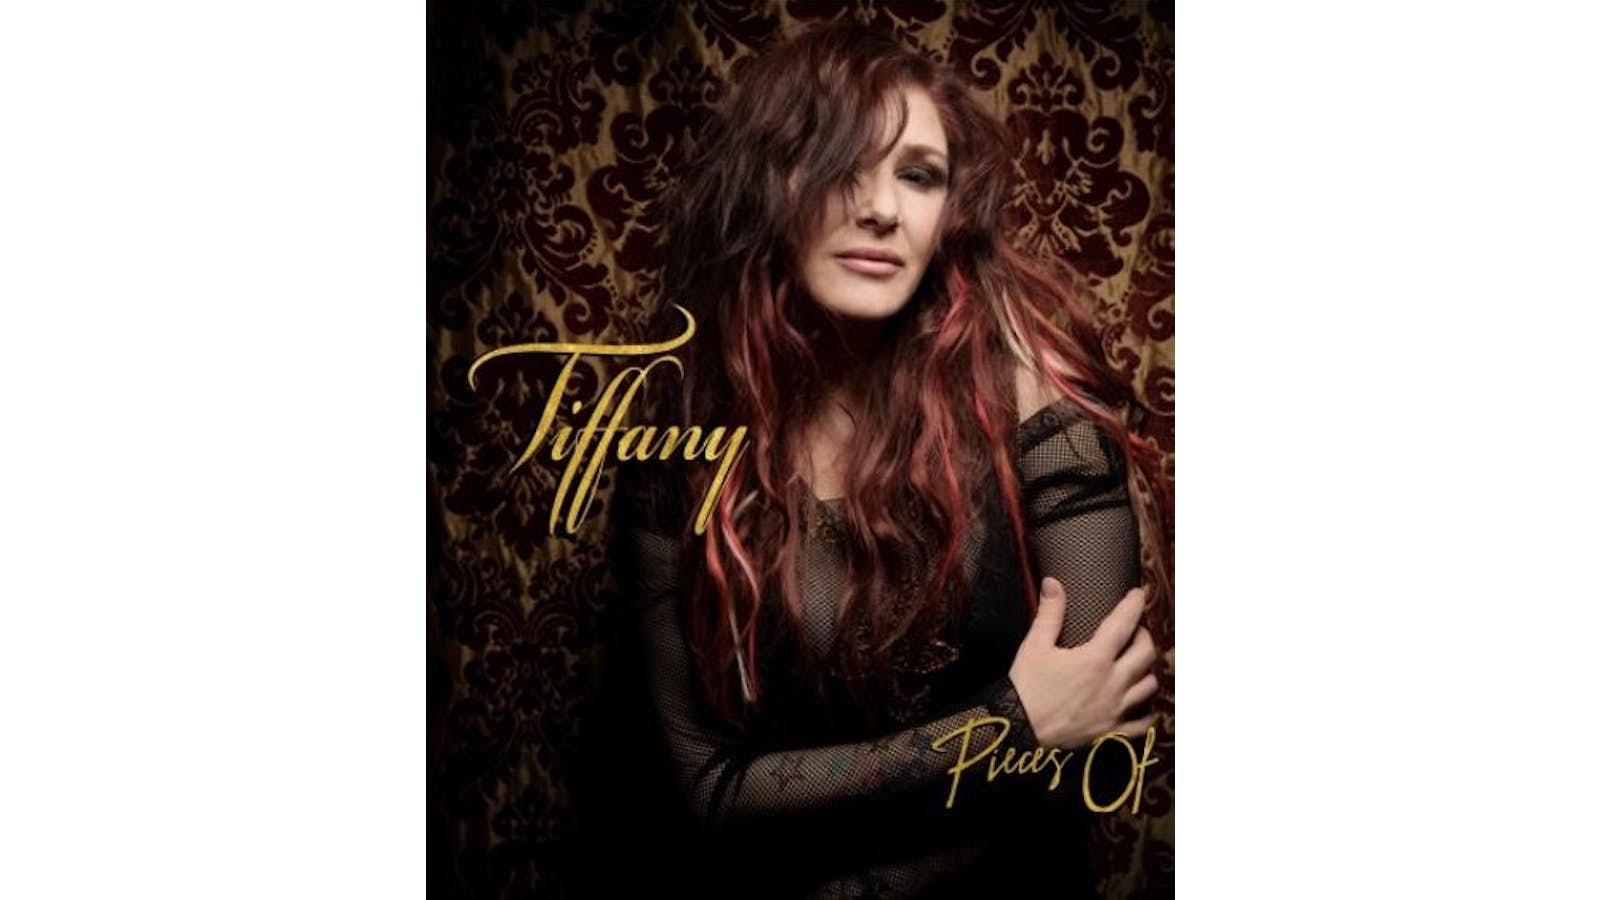 Hand-Signed Pieces of Me CD - Tiffany - Official Webstore - Tiffany